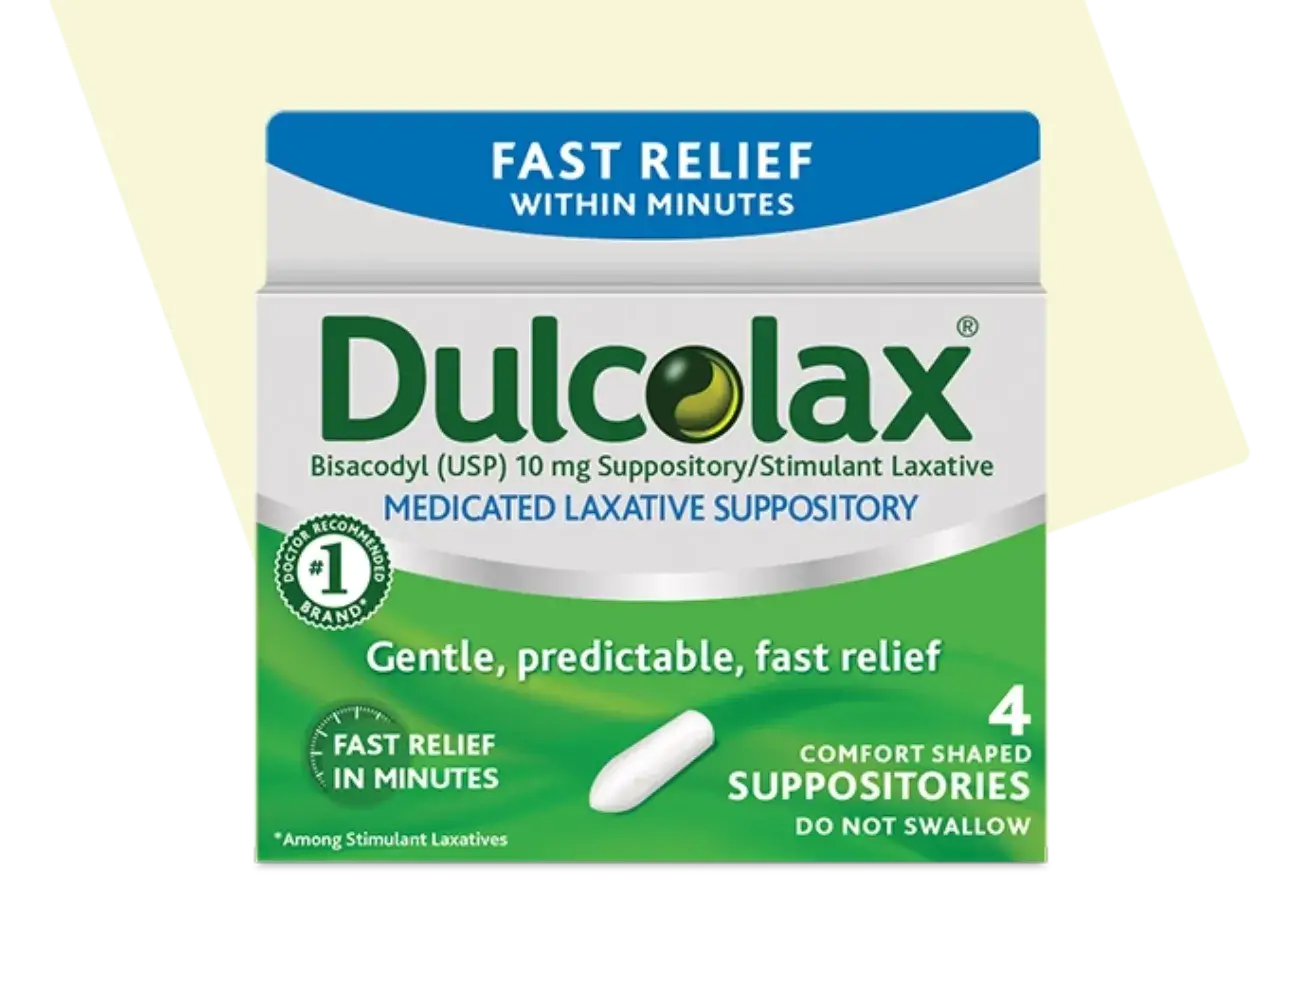 Laxative Suppositories for Constipation Relief